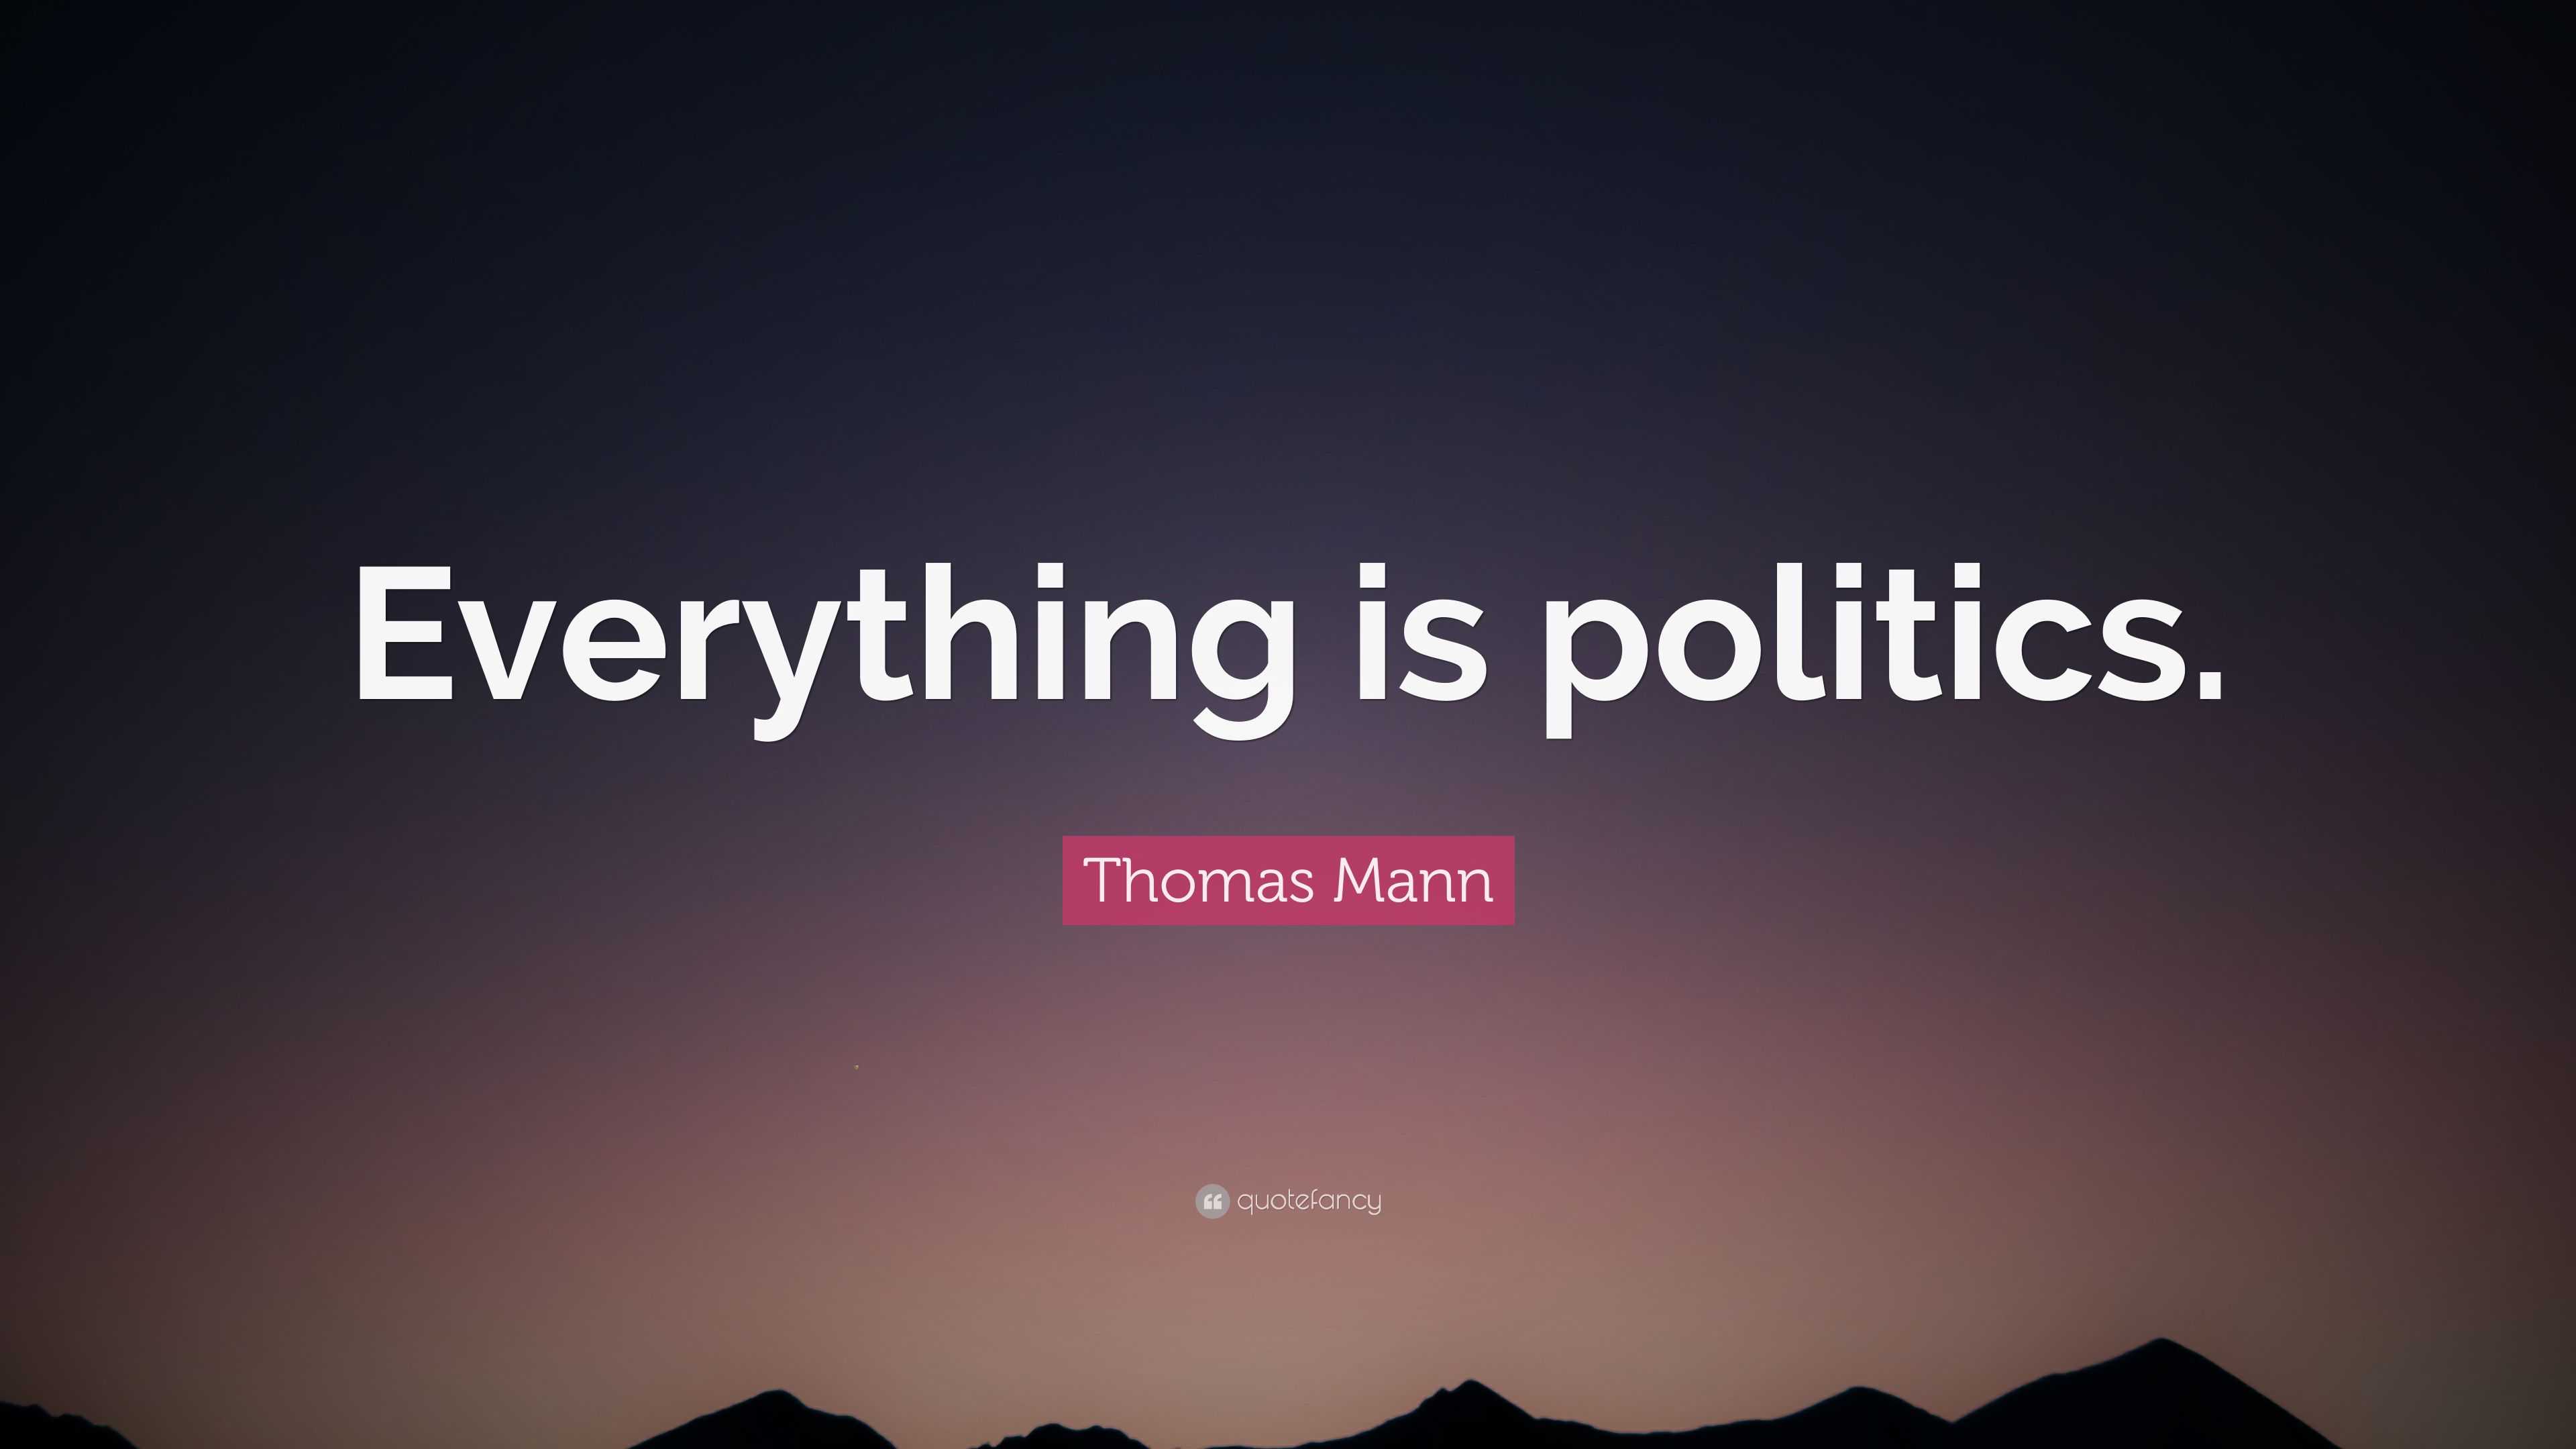 Thomas Mann Quote “everything Is Politics” 9932